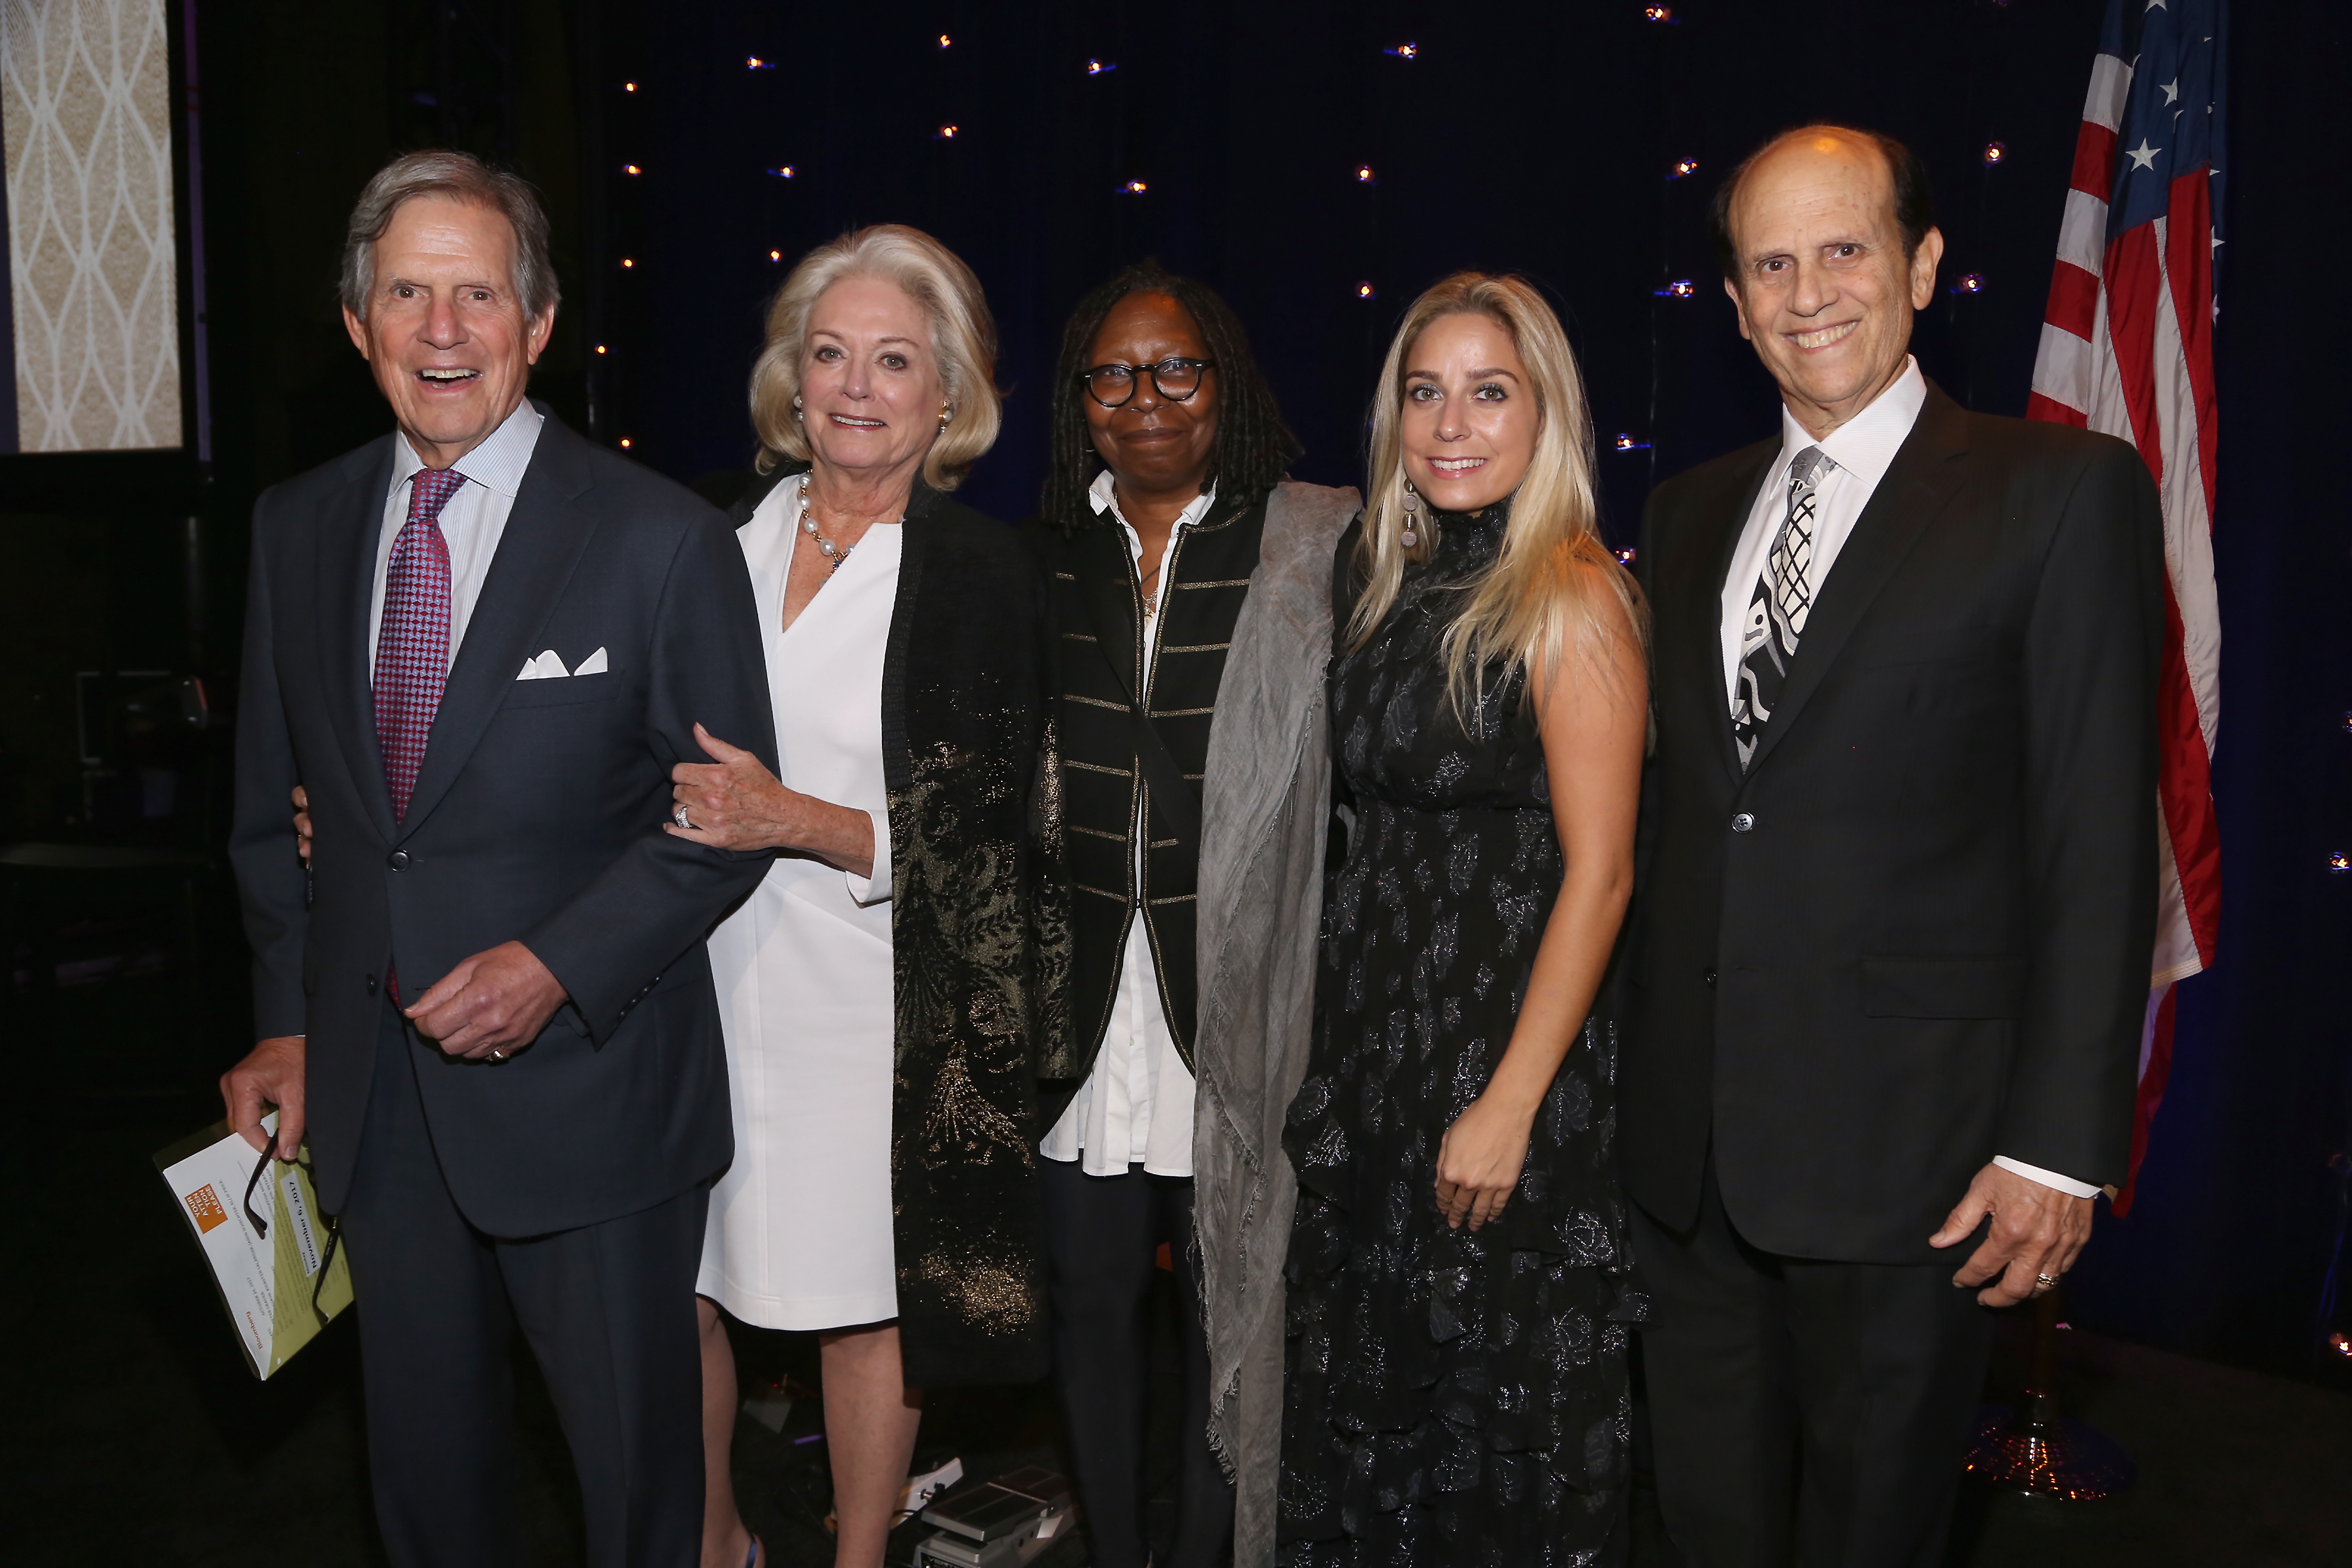 Peter Grauer, Laurie Grauer, Whoopi Goldberg, Nina Grauer, Michael Milken==
Prostate Cancer Foundation Presents the 2017 New York Dinner==
Cipriani 42nd Street, NYC==
November 6, 2017==
©Patrick McMullan==
Photo - Sylvain Gaboury/PMC==
==